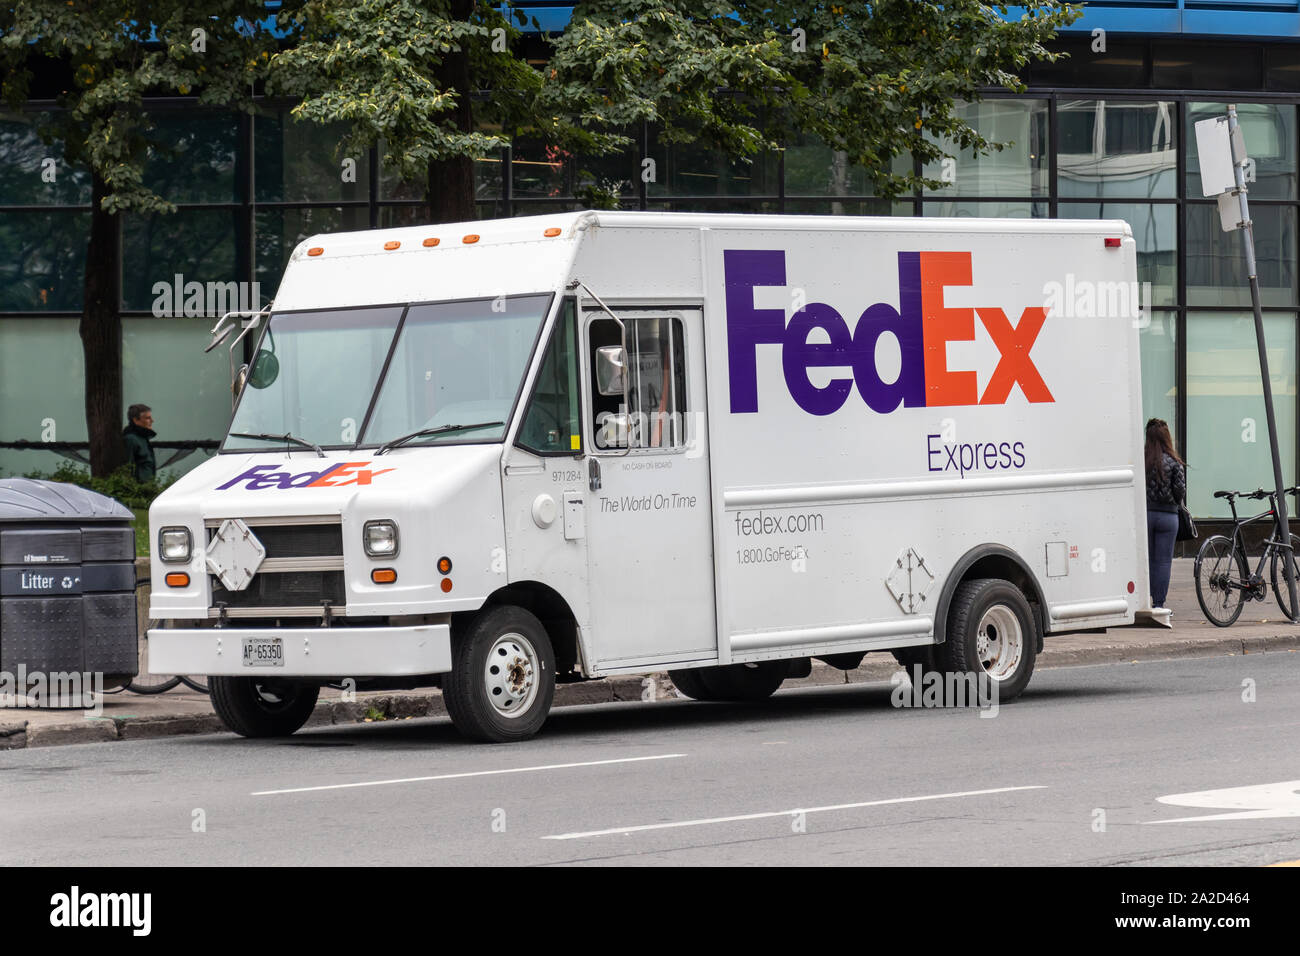 FedEx Express delivery van parked on the side of the road in a city. Stock Photo